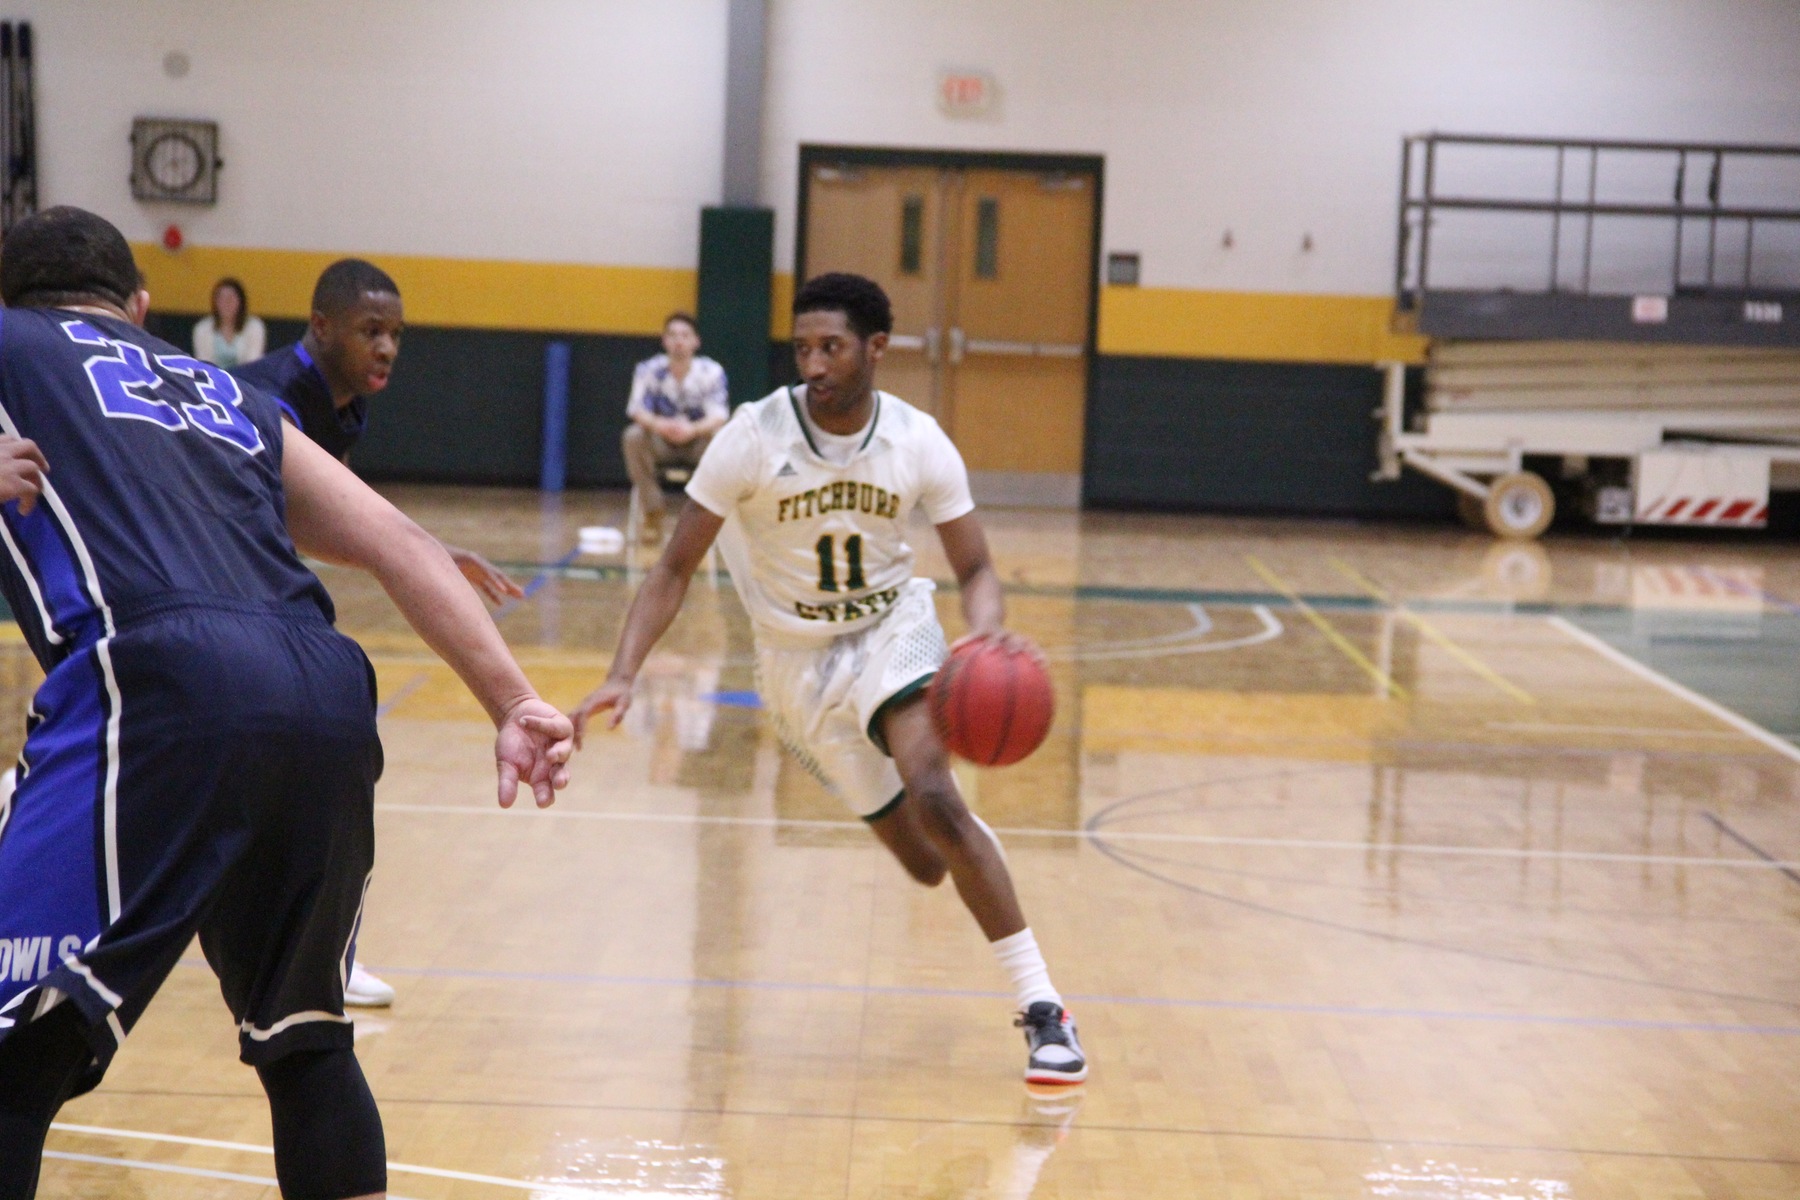 Fitchburg State Soars Past Westfield State, 75-59